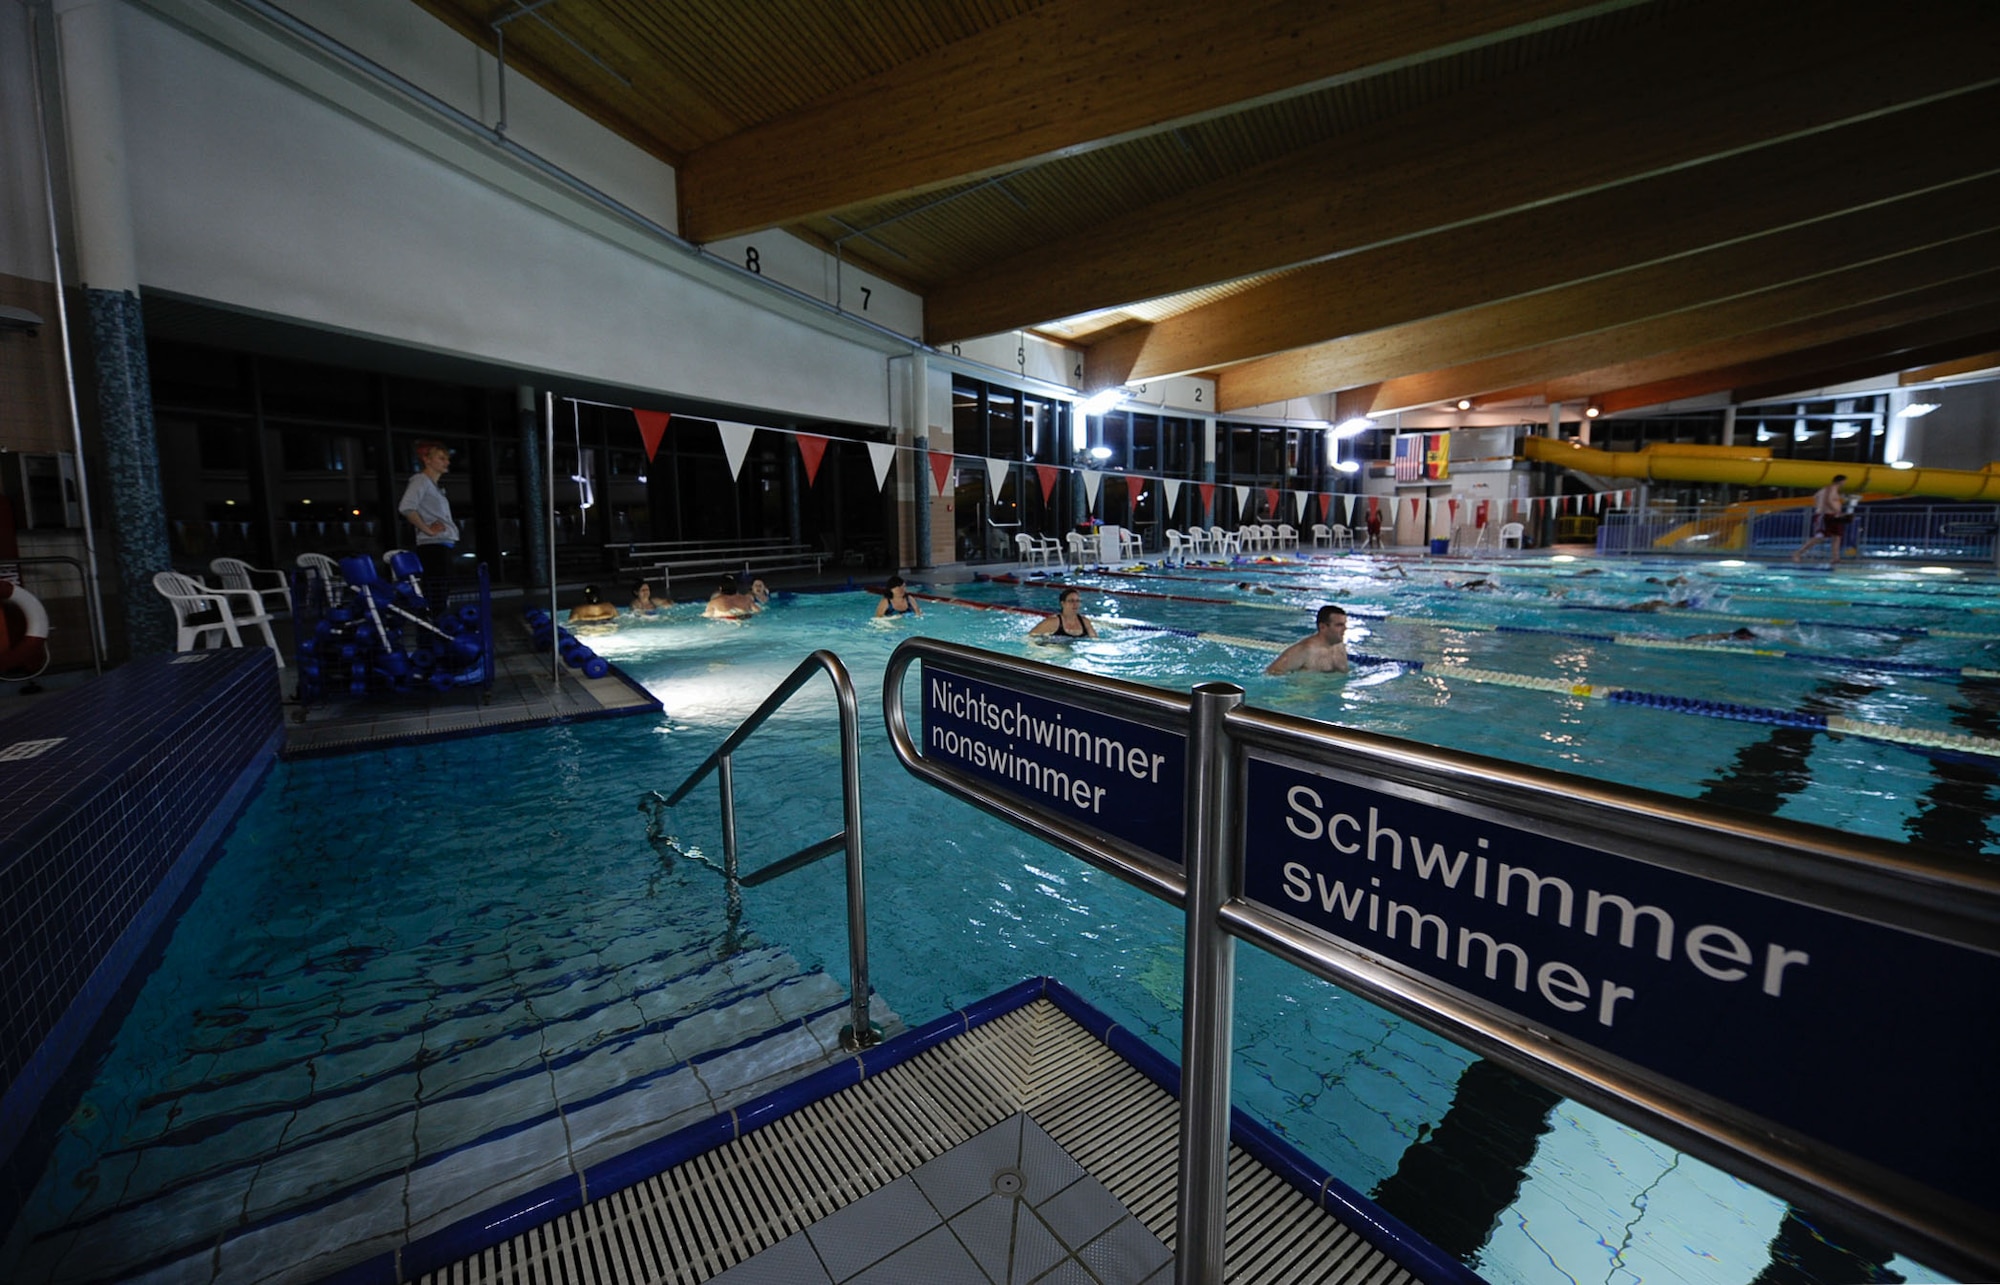 Swim class participants do exercises at the Aquatic Center on Ramstein Air Base, Germany, Feb. 14, 2017. Some of the students are swimming as participation in the seventh annual Kaiserslautern Military Community’s ‘Biggest Loser’ challenge. (U.S. Air Force photo by Airman 1st Class Savannah L. Waters)